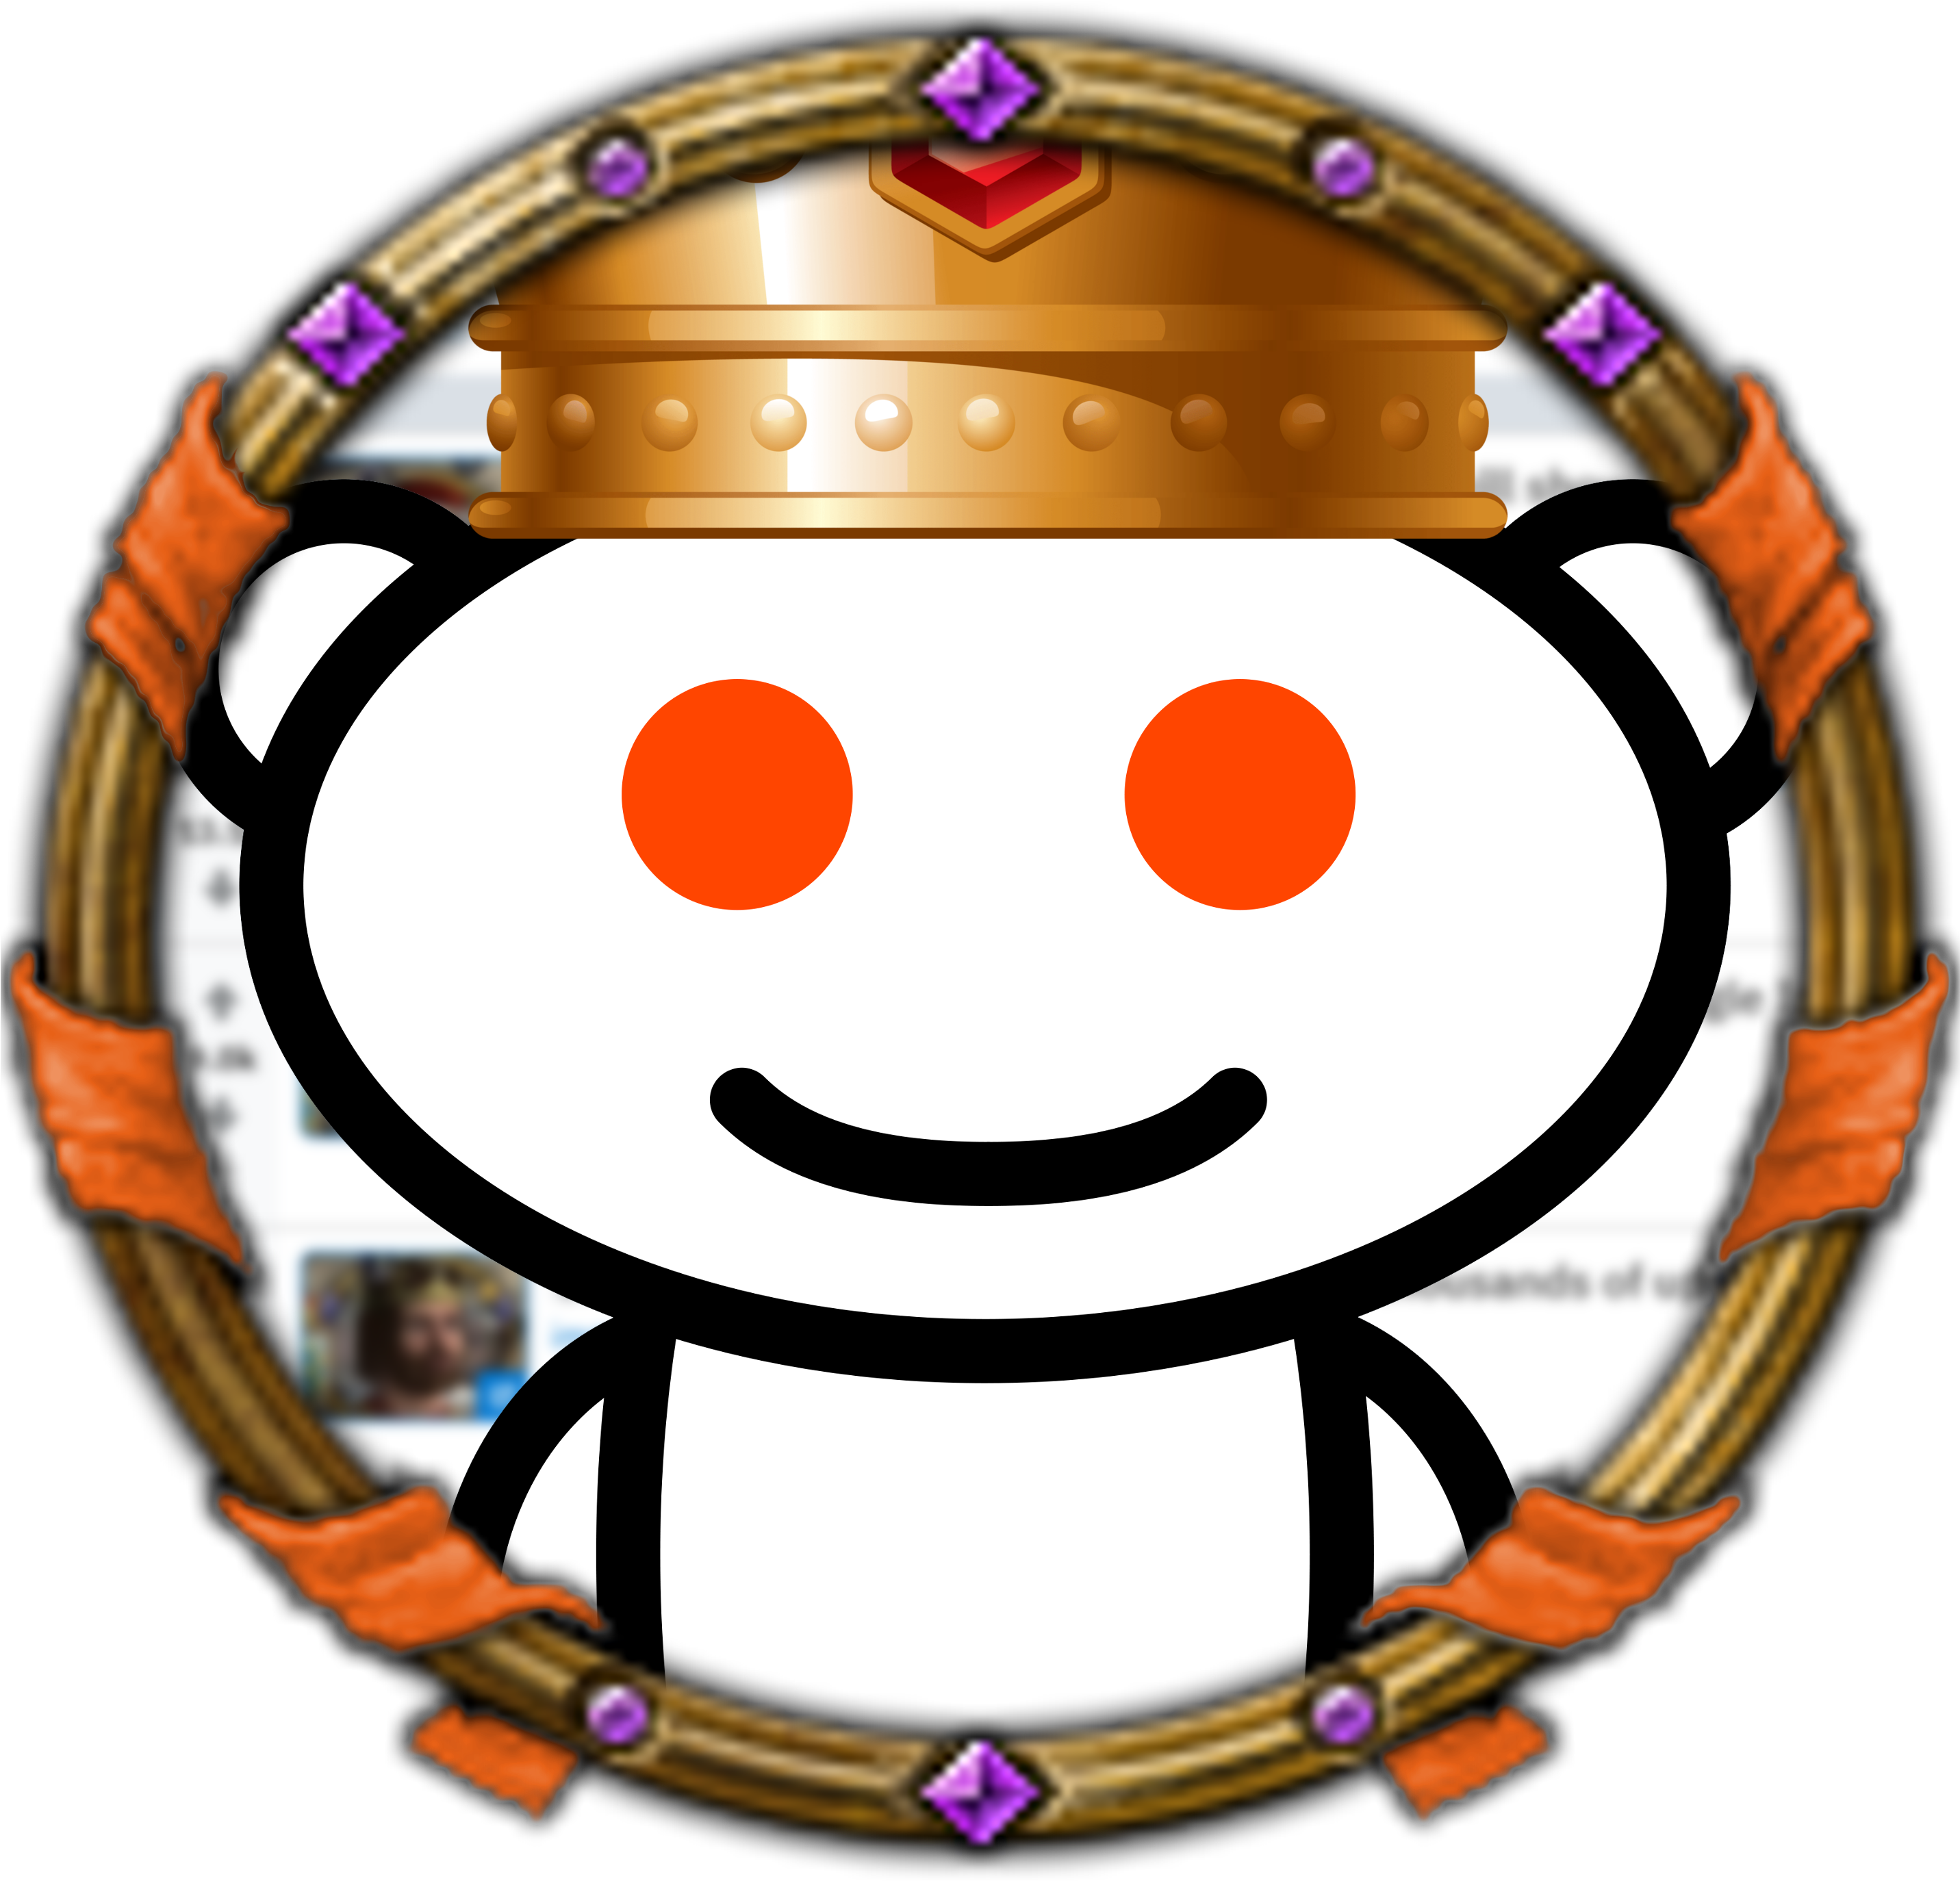 A Nice Snoo I Made For The Crusader Kings Reddit In - Test Please Ignore Meme (2862x2862), Png Download